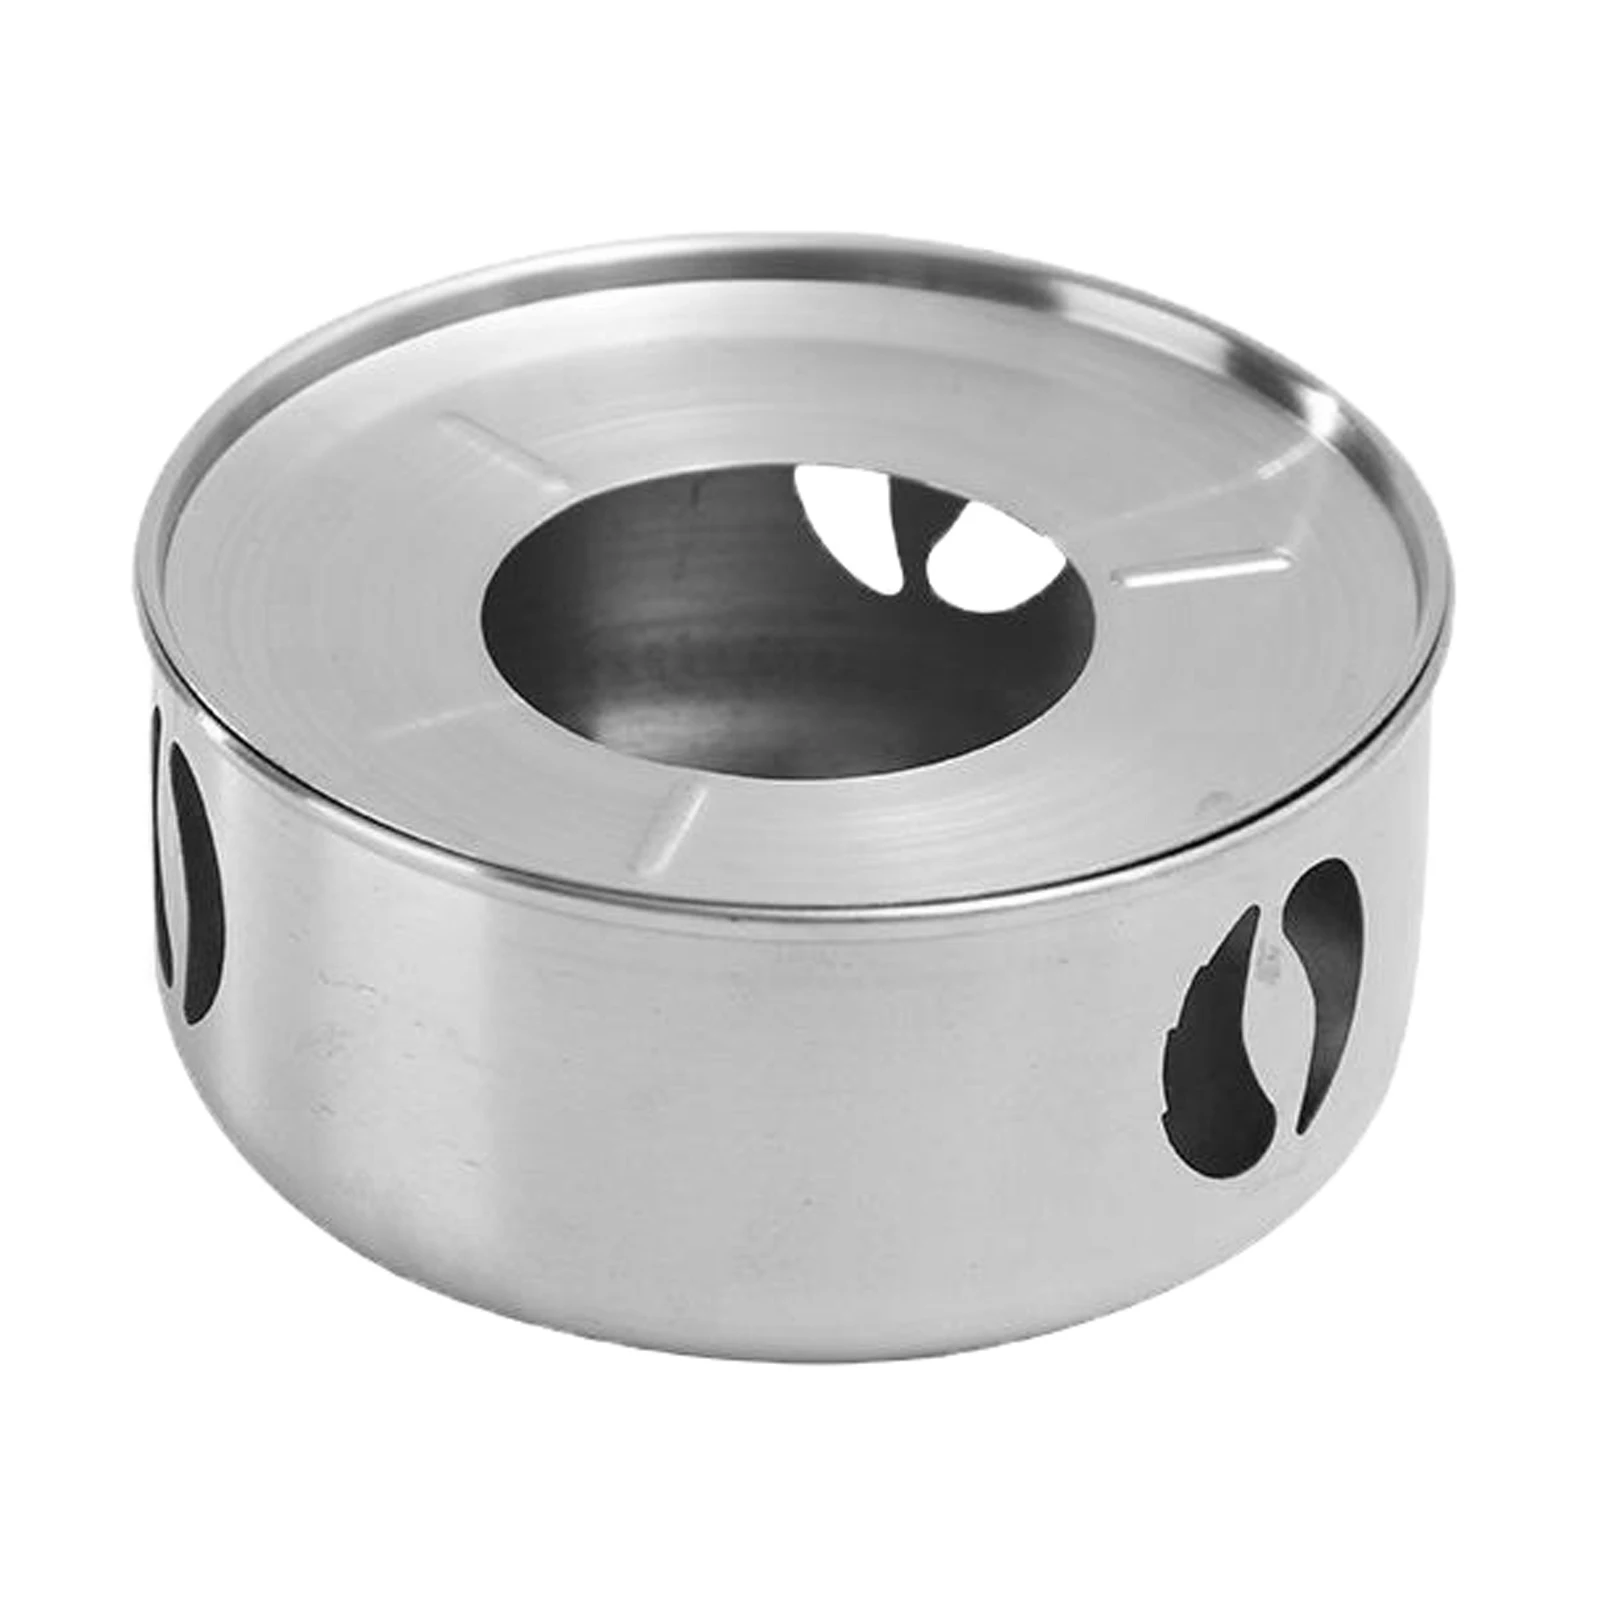 Portable Alcohol Stove, Outdoor Mini Burner, Ultralight Camping Stove for Picnic Camping Cooking (Silver)